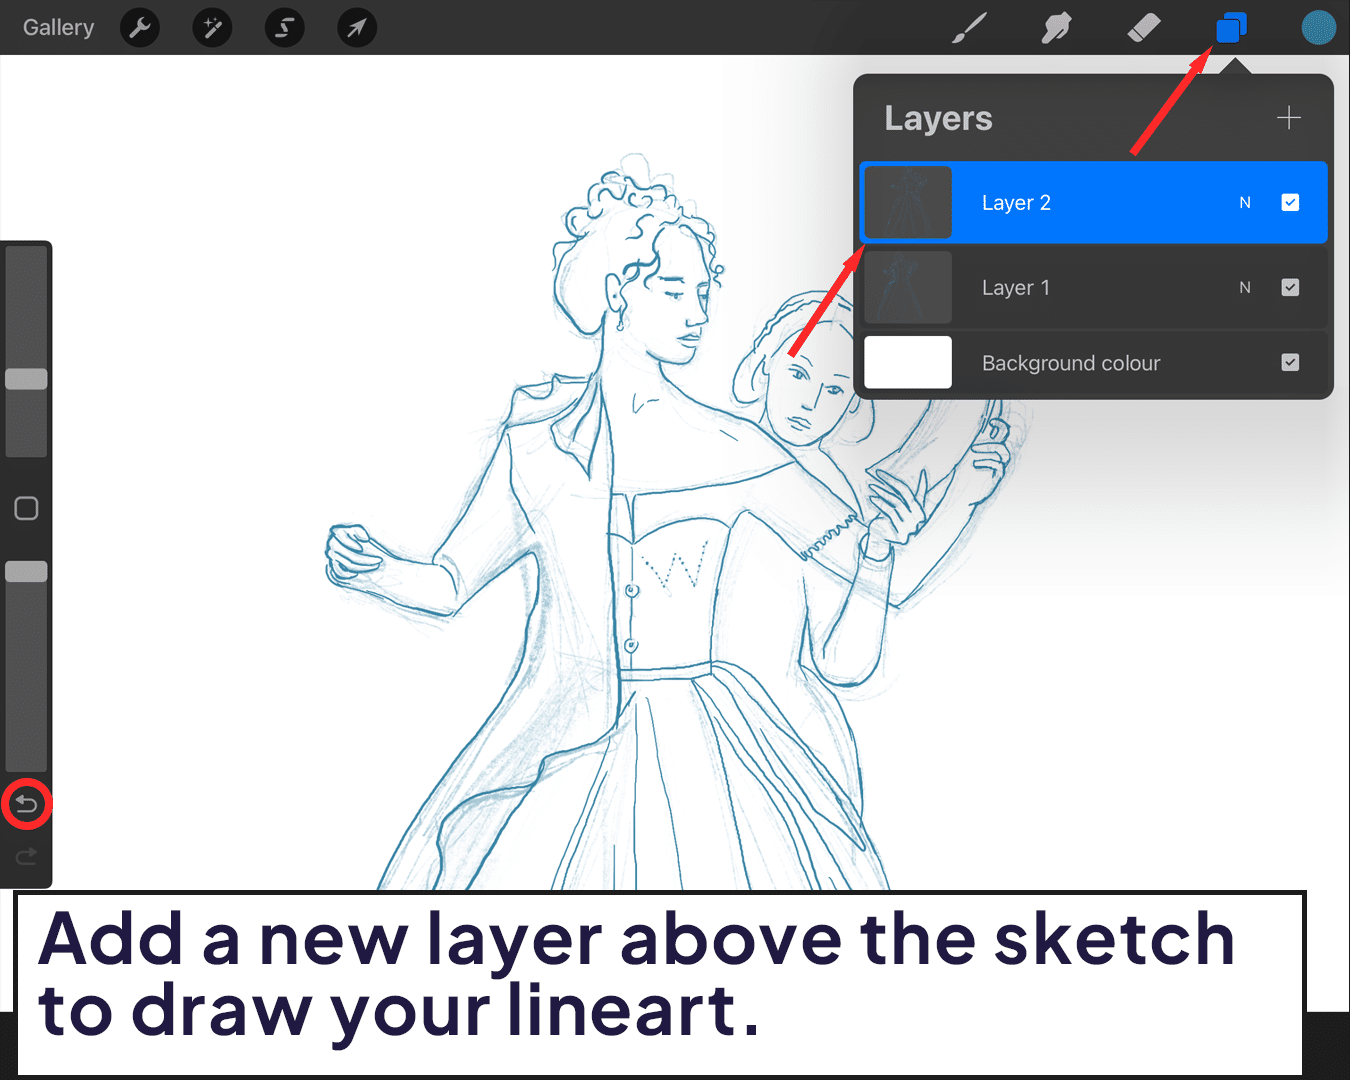 New layer above the sketch